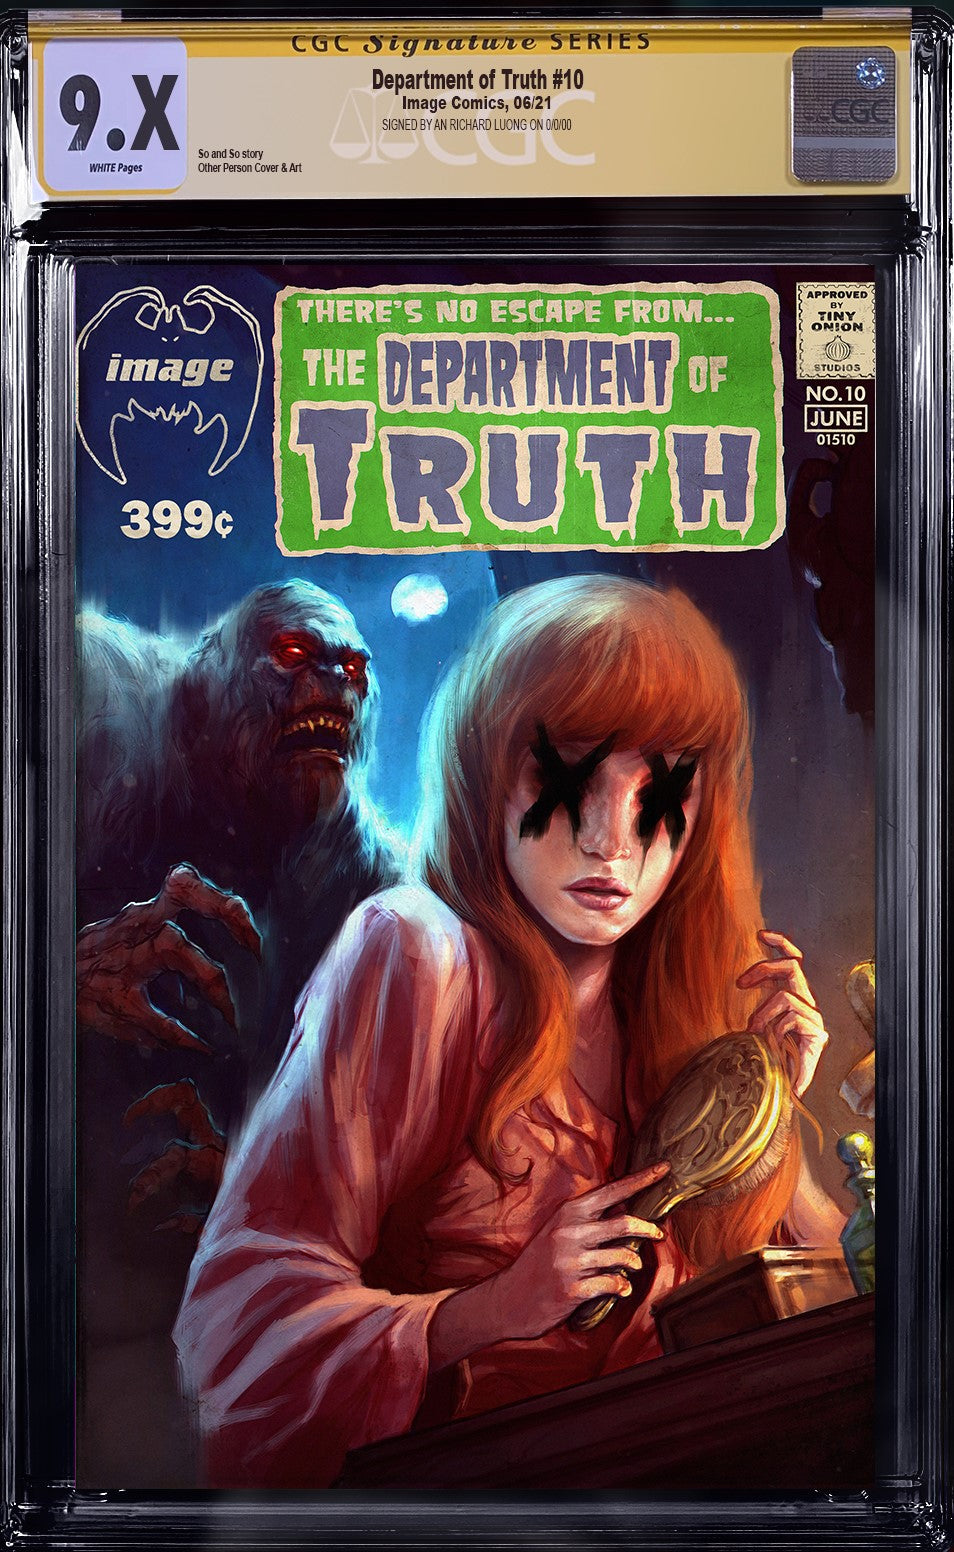 The One Stop Shop Comics & Games Department Of Truth #10 Richard Luong Exclusive Variant (06/30/2021) IMAGE COMICS